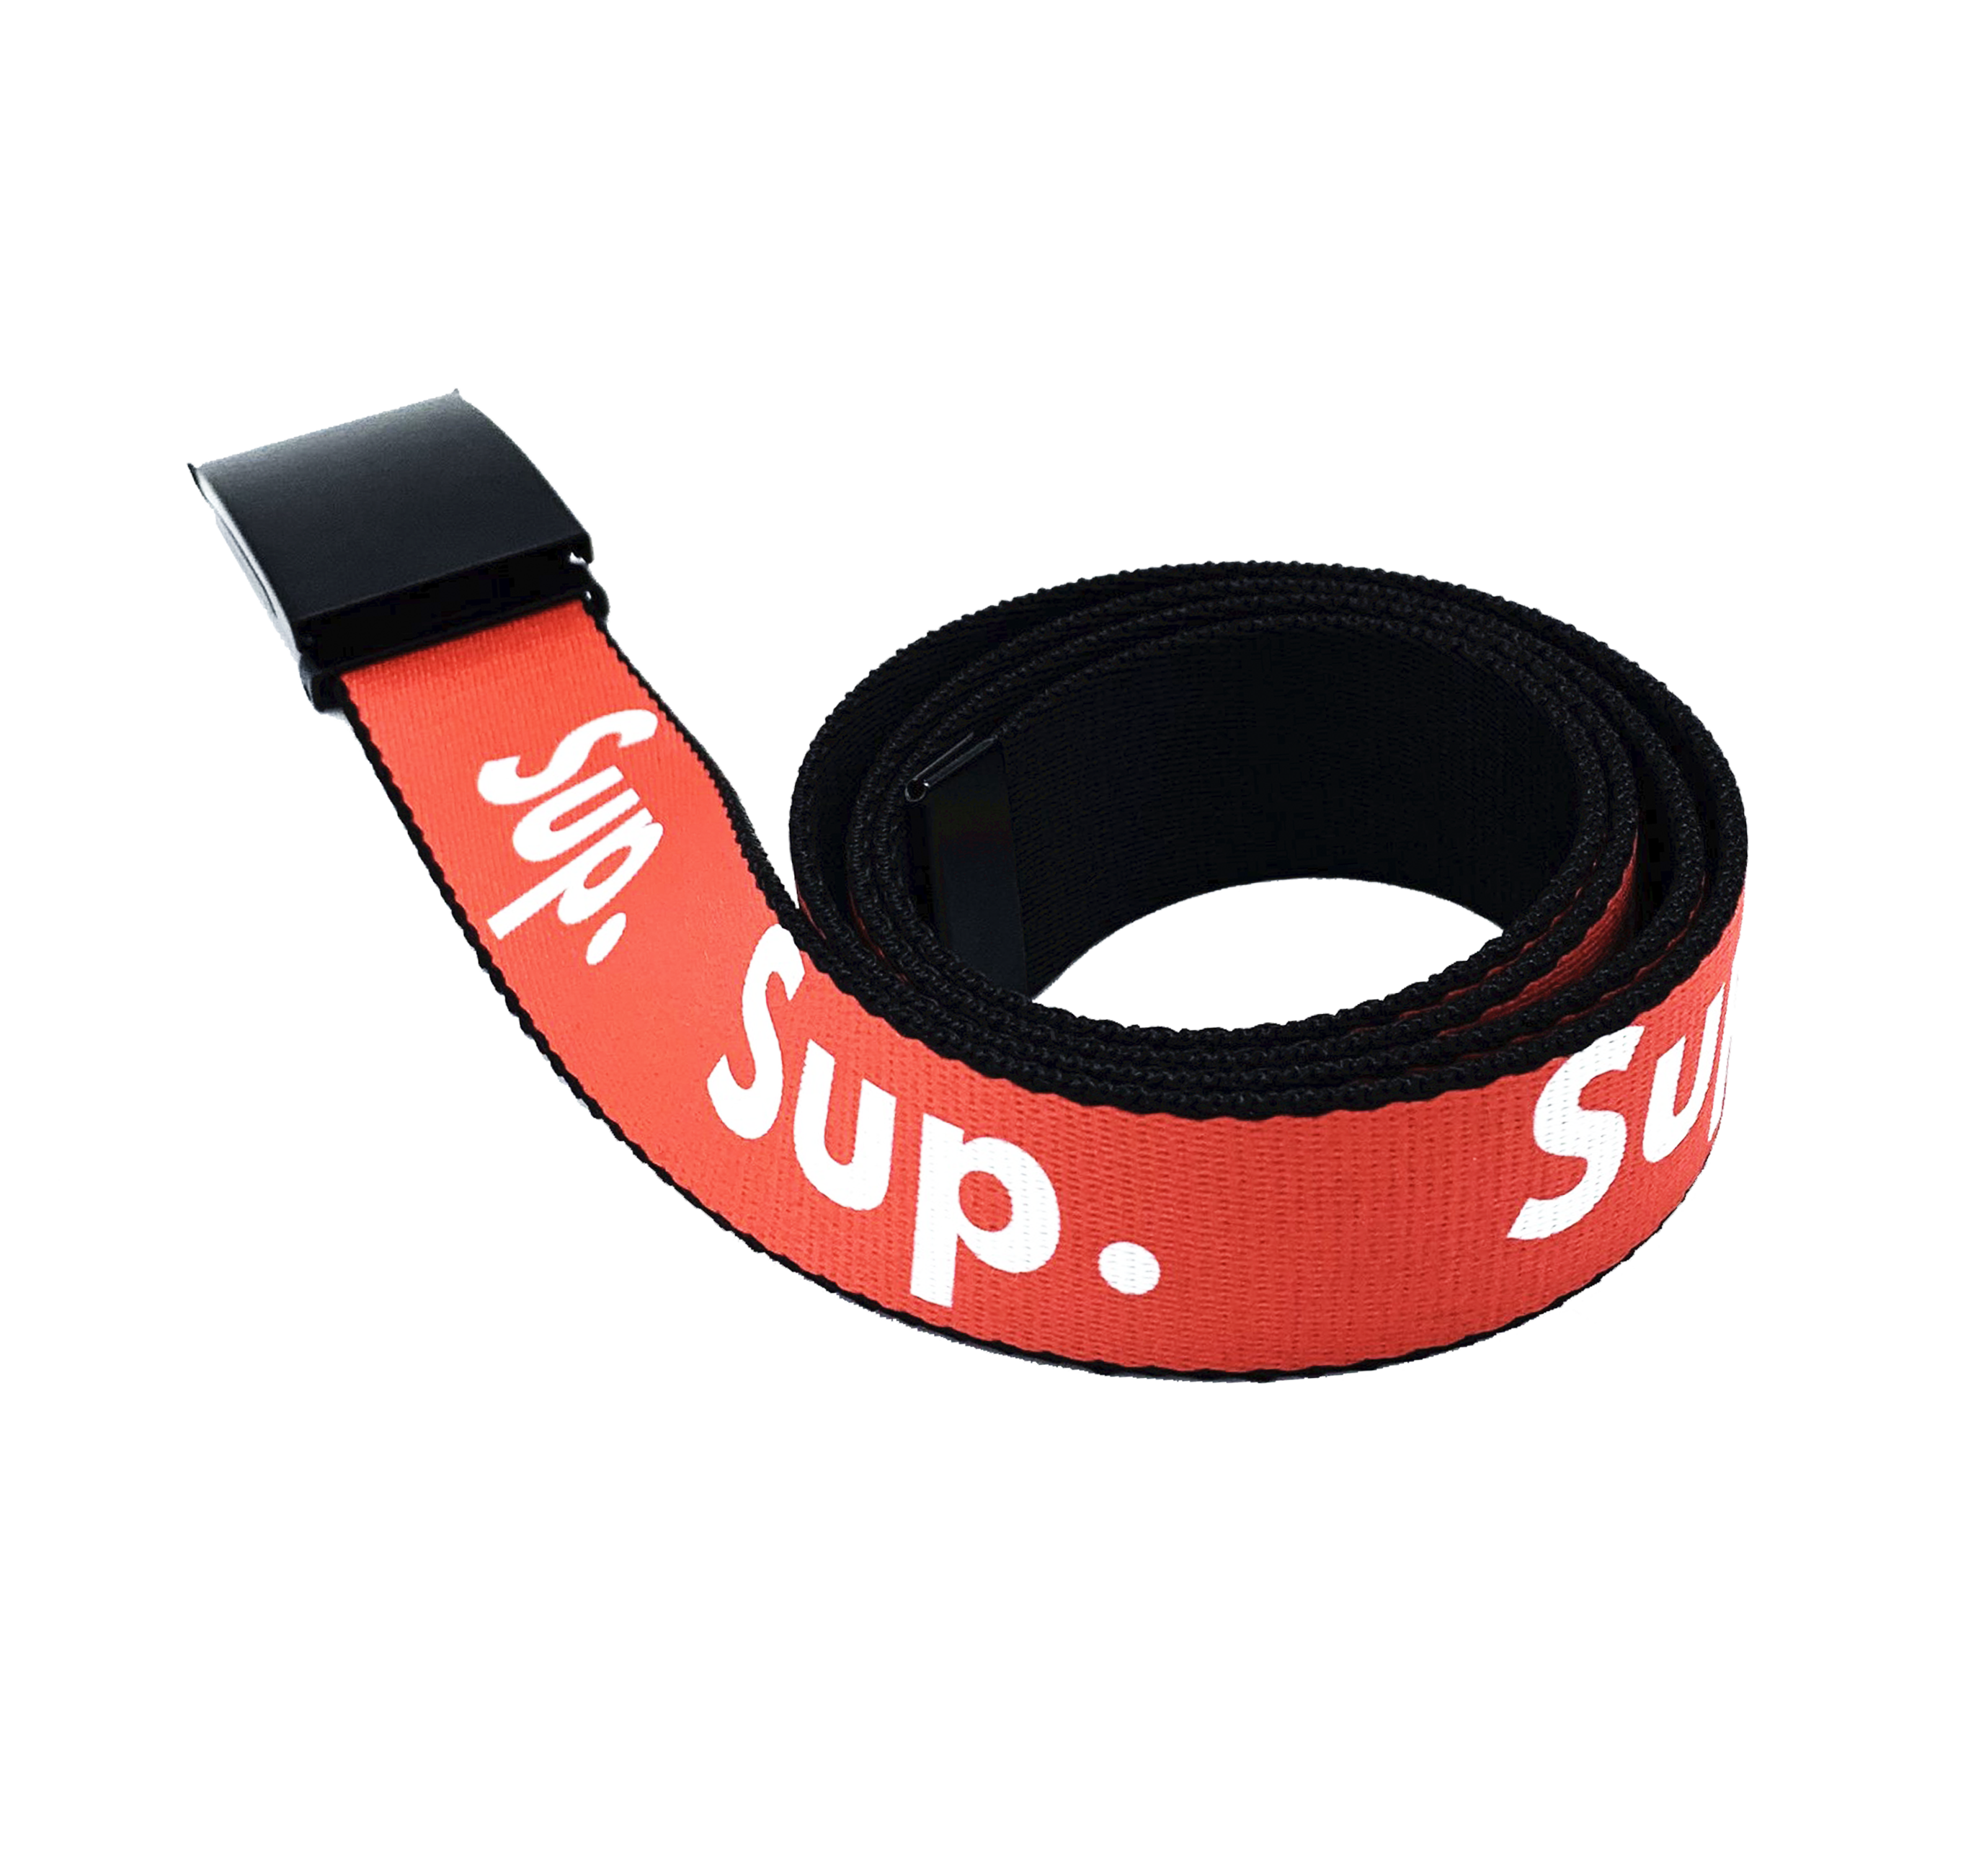 Supreme, Accessories, Supreme Belt And Other Items